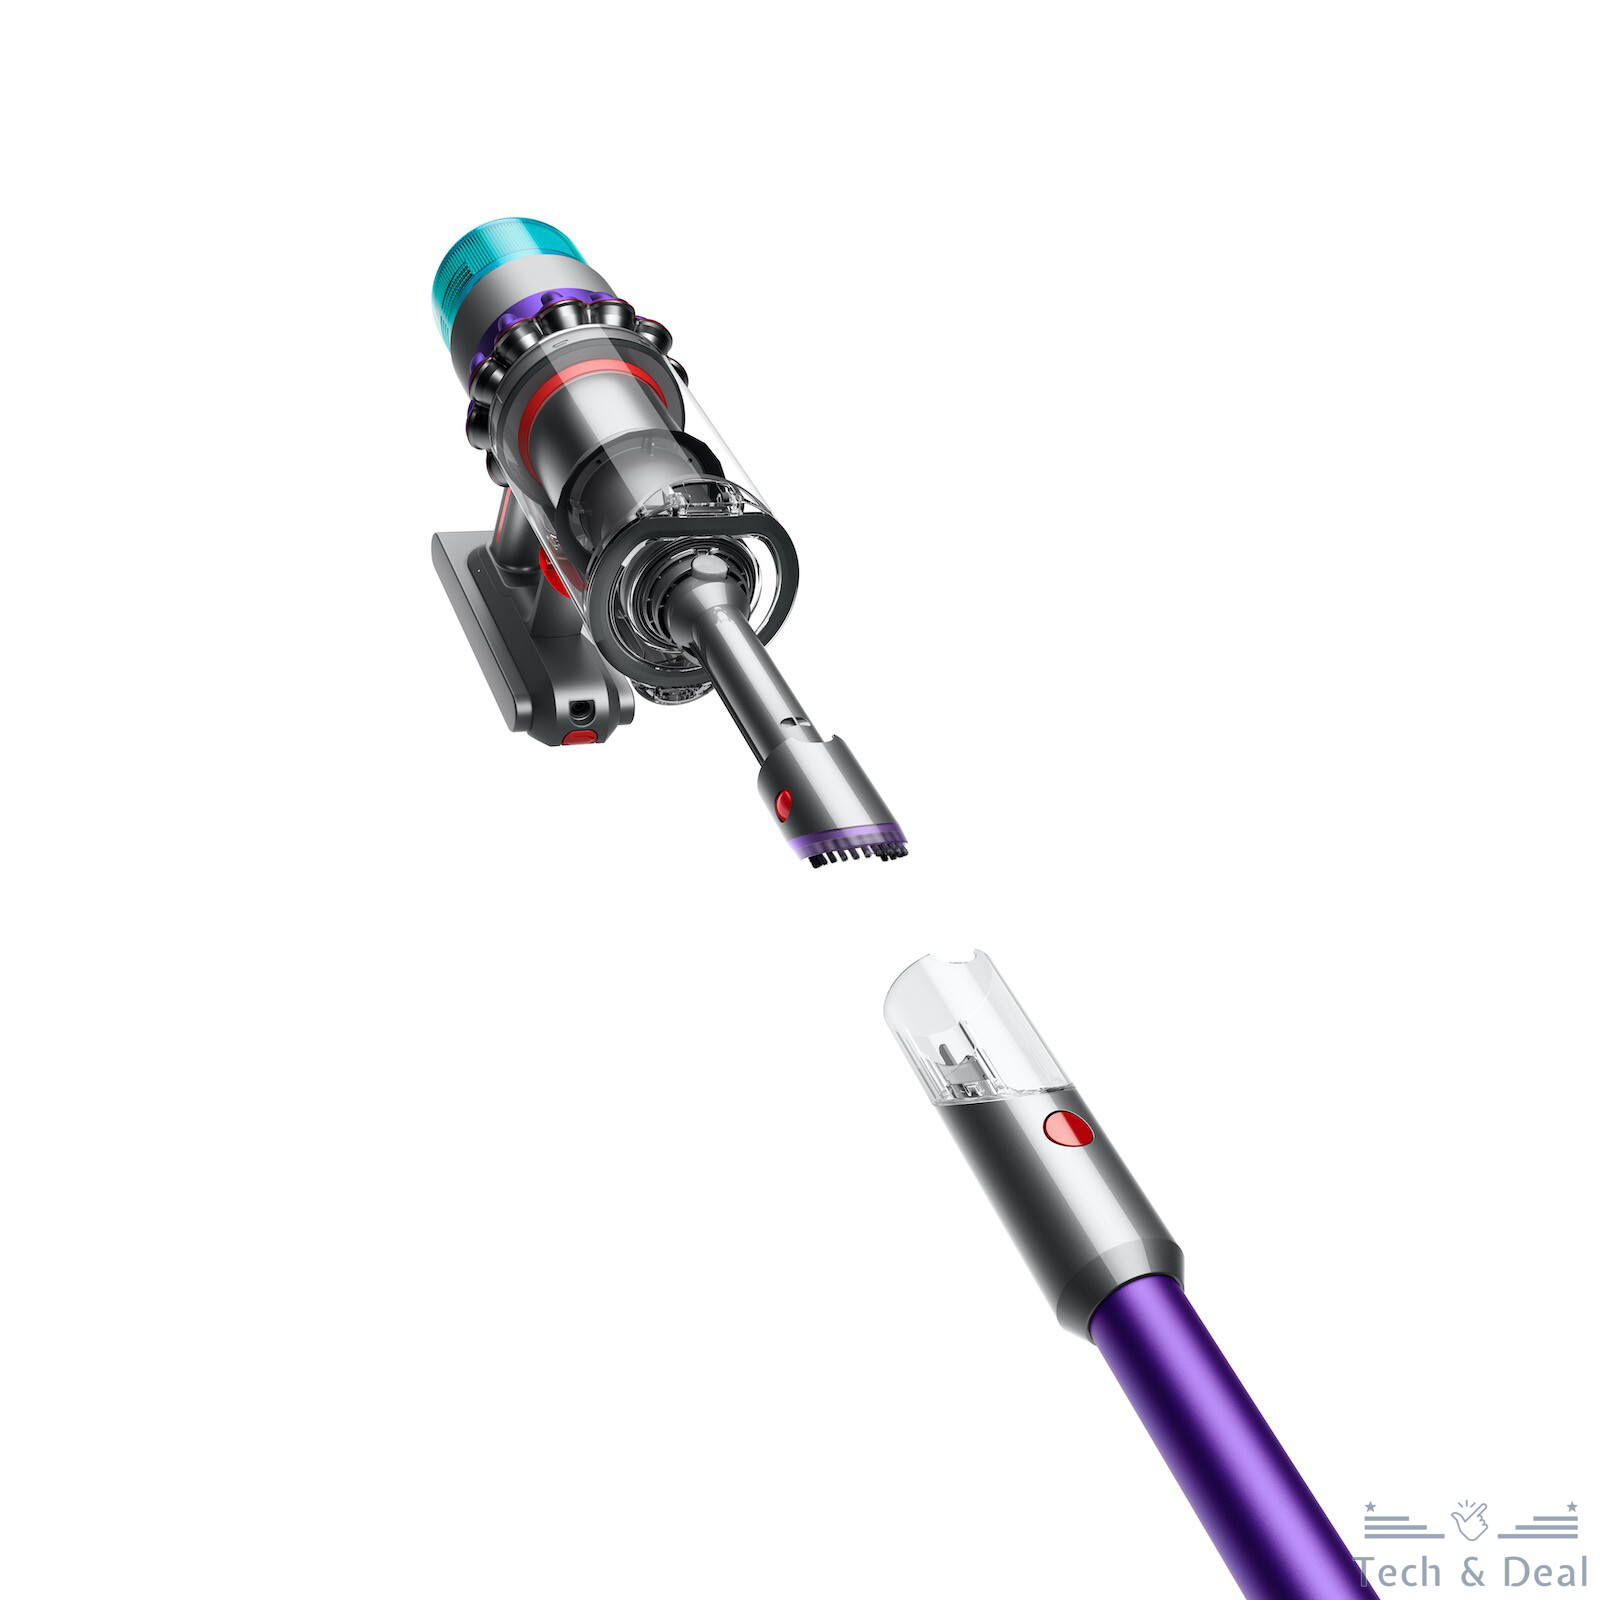 dyson gen5detect crevice tool built in